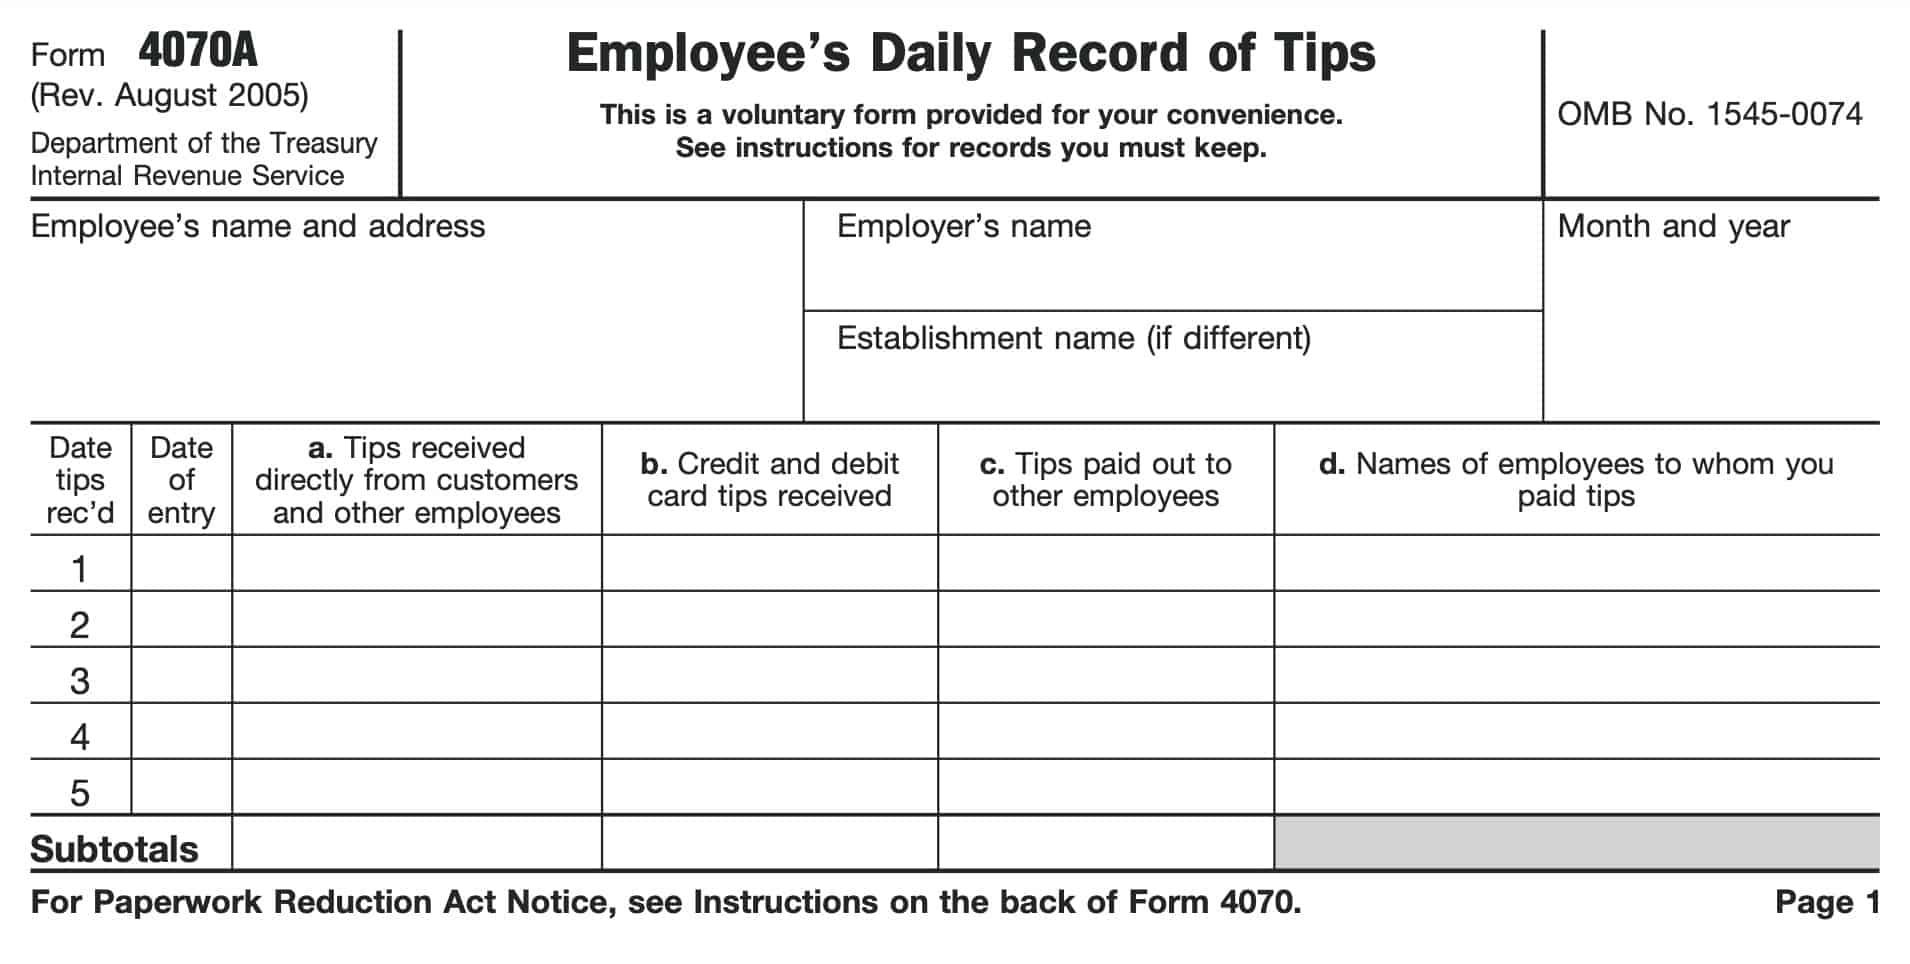 Page 1 of IRS Form 4070A contains employee's name & address, employer's name, month, and year